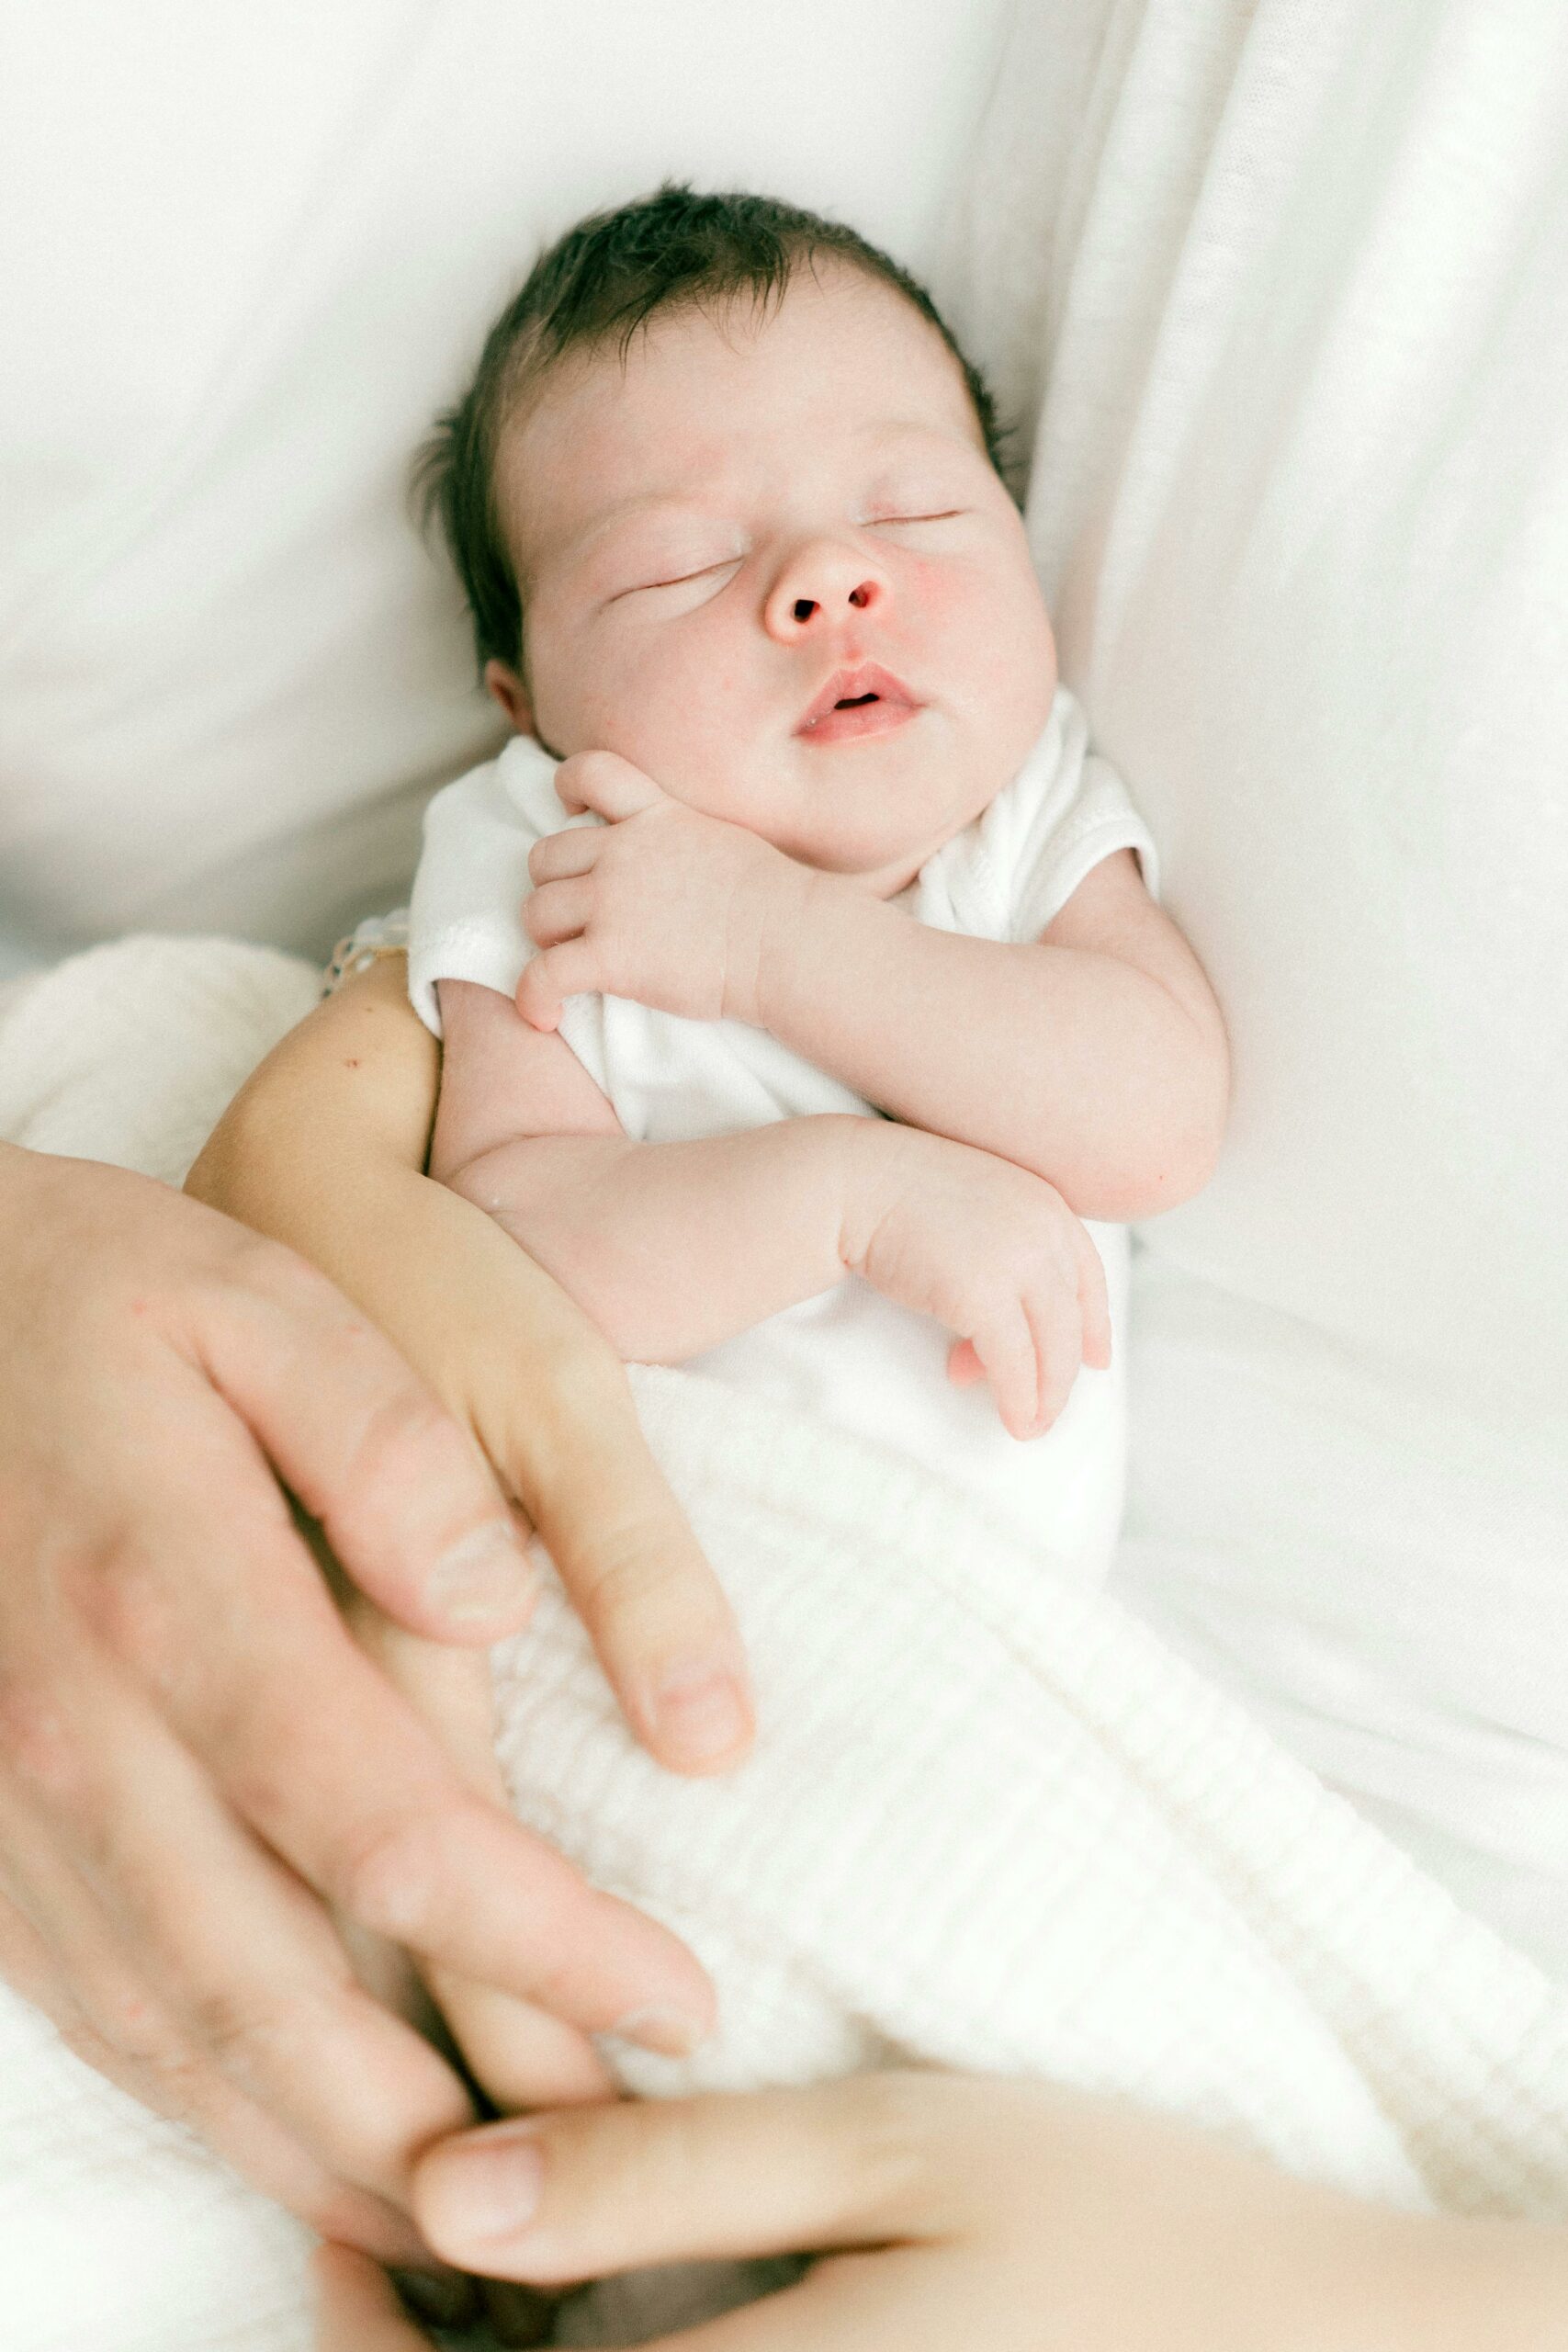 Closeup of a peaceful newborn baby cradled securely in the loving arms of its parents, illustrating the expert, supportive, and safe newborn care services provided